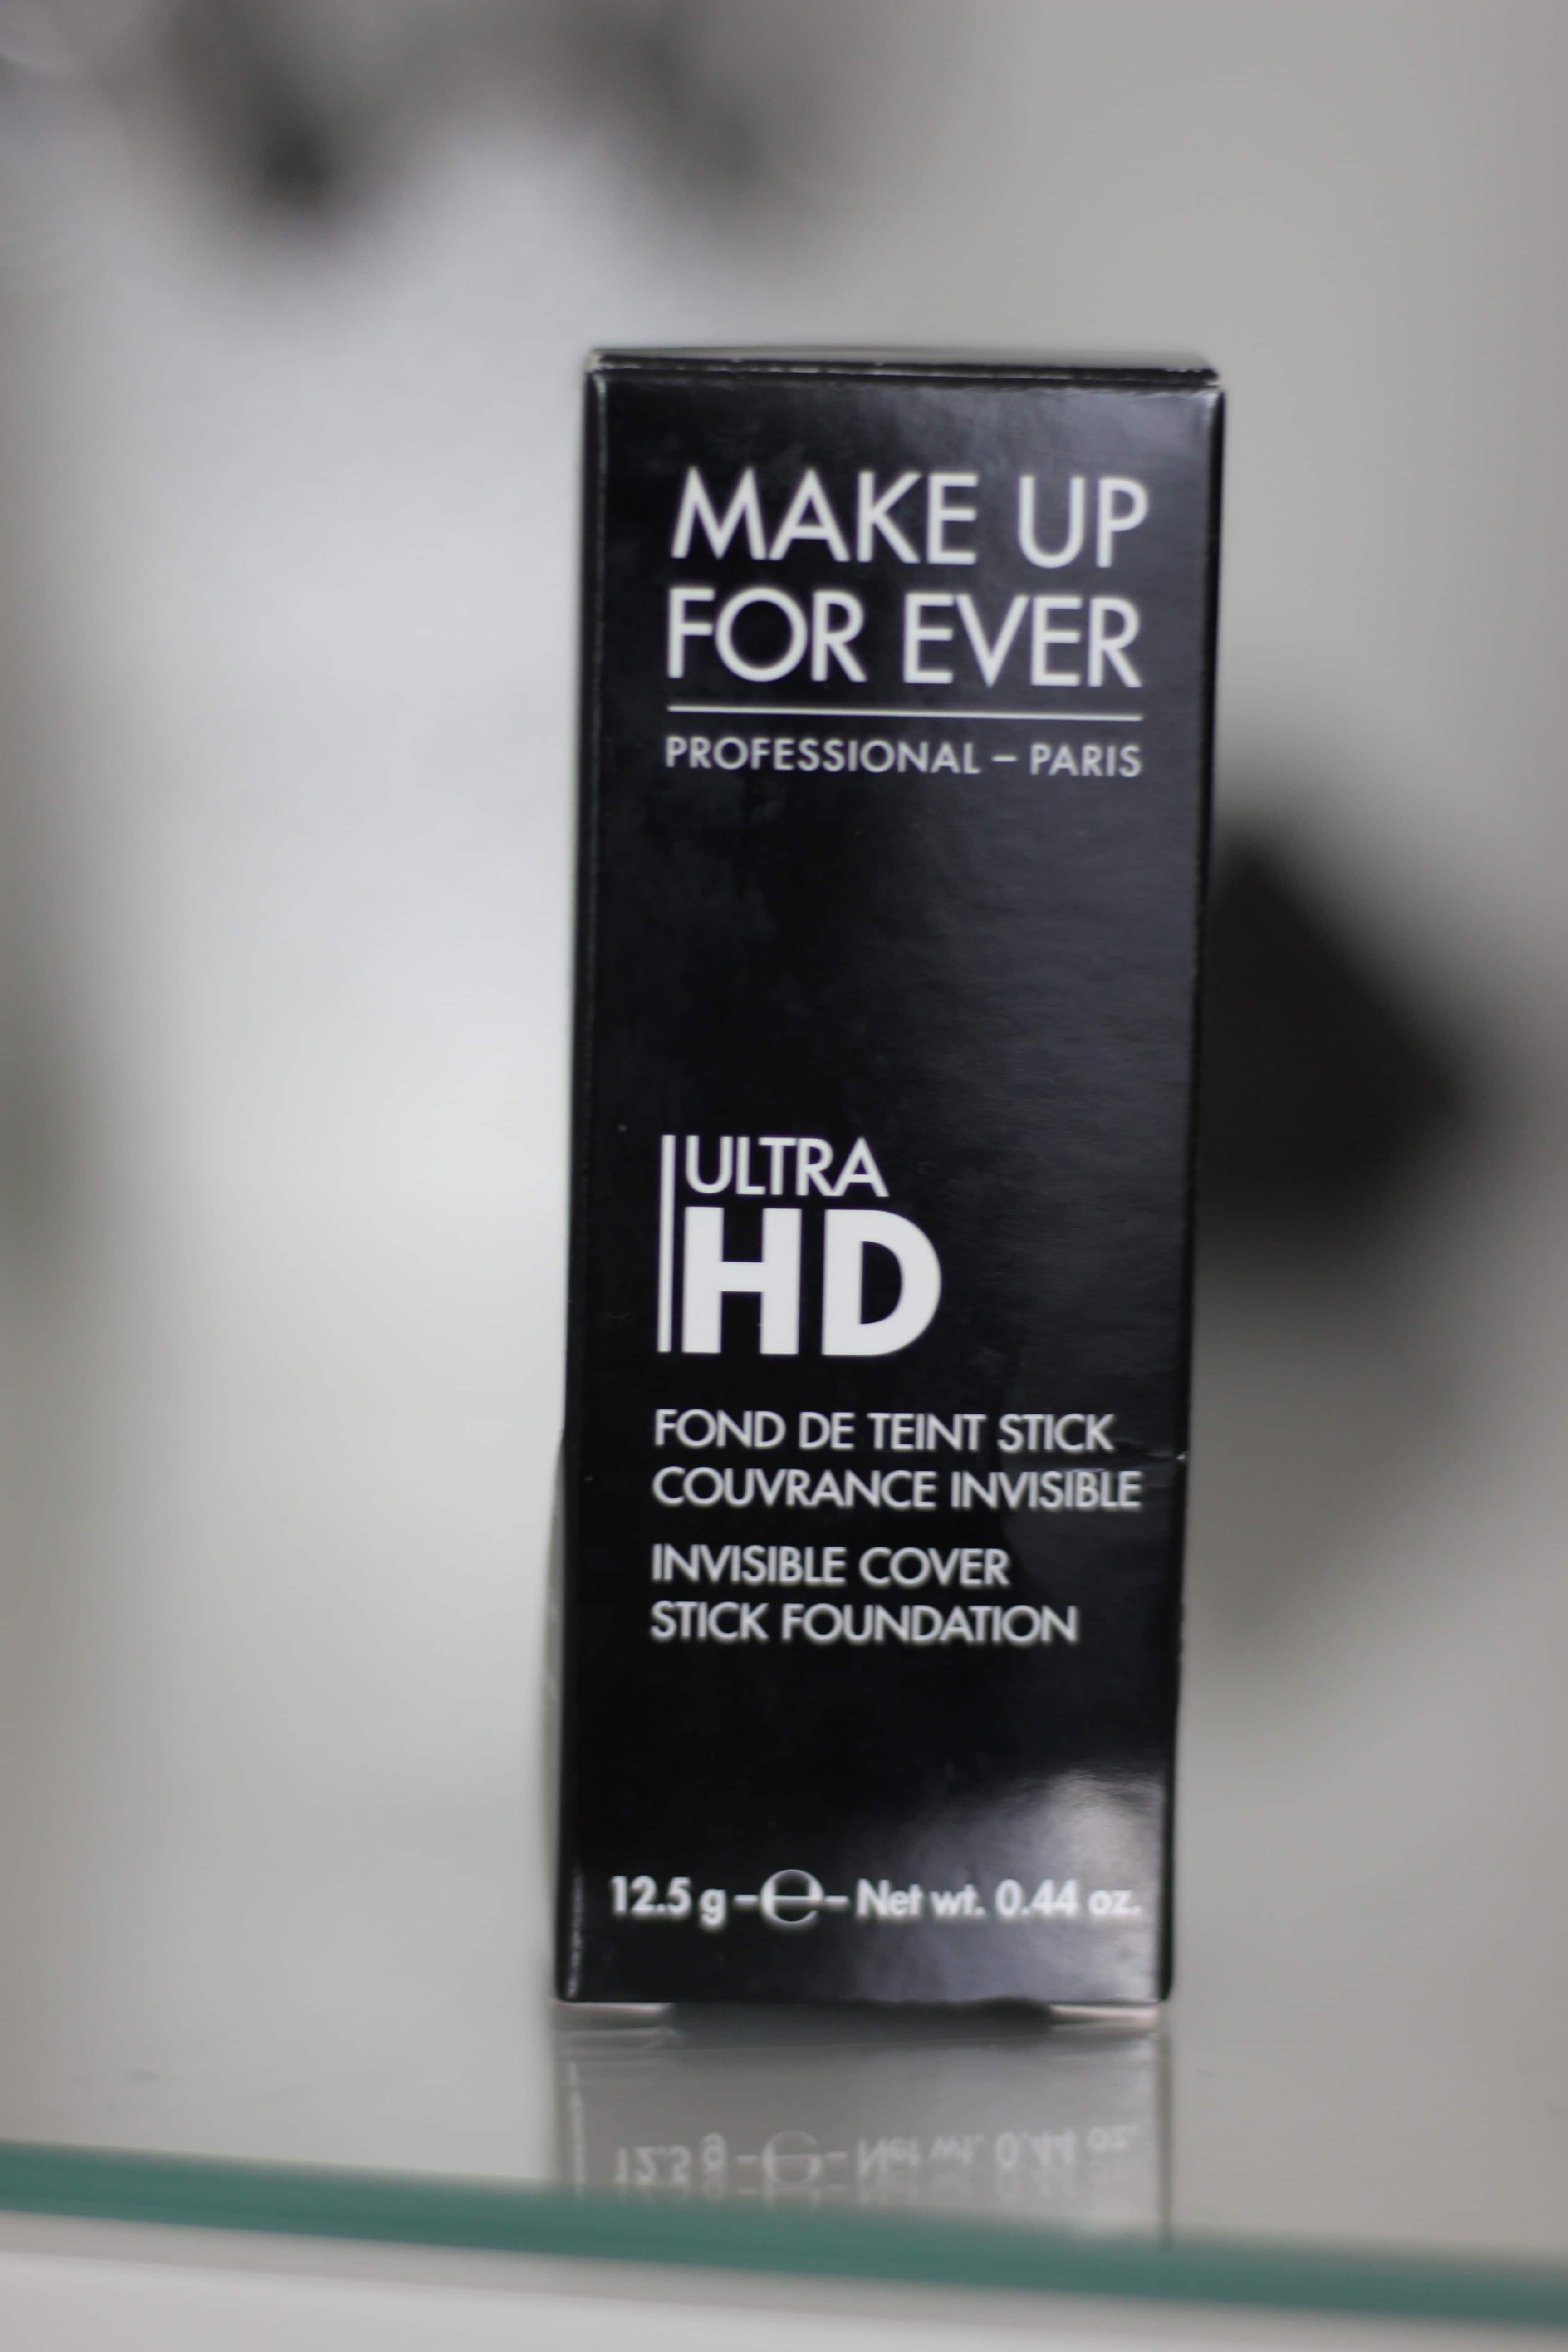 Makeup Forever Ultra HD Stick Foundation Review